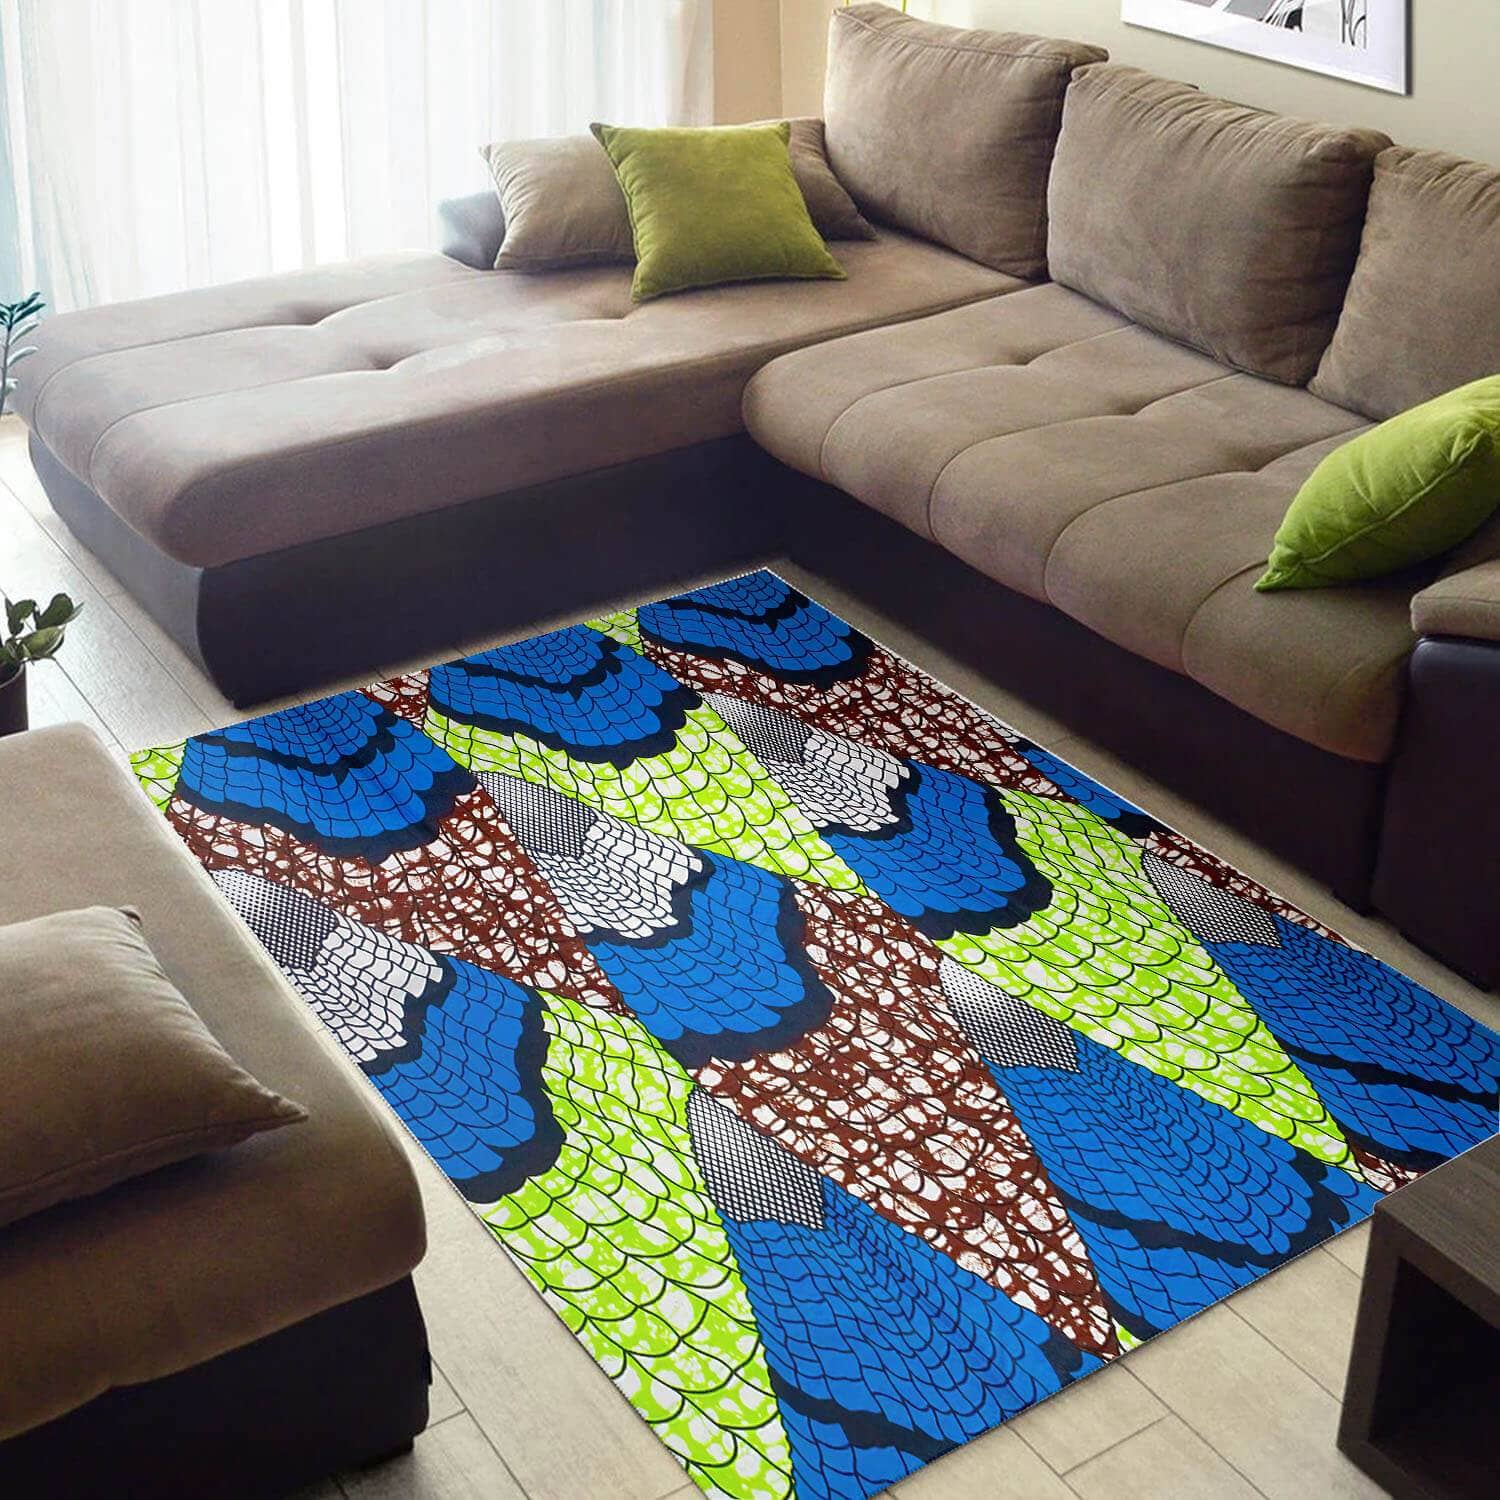 Trendy African American Colorful Afrocentric Pattern Art Style Floor Inspired Living Room Rug